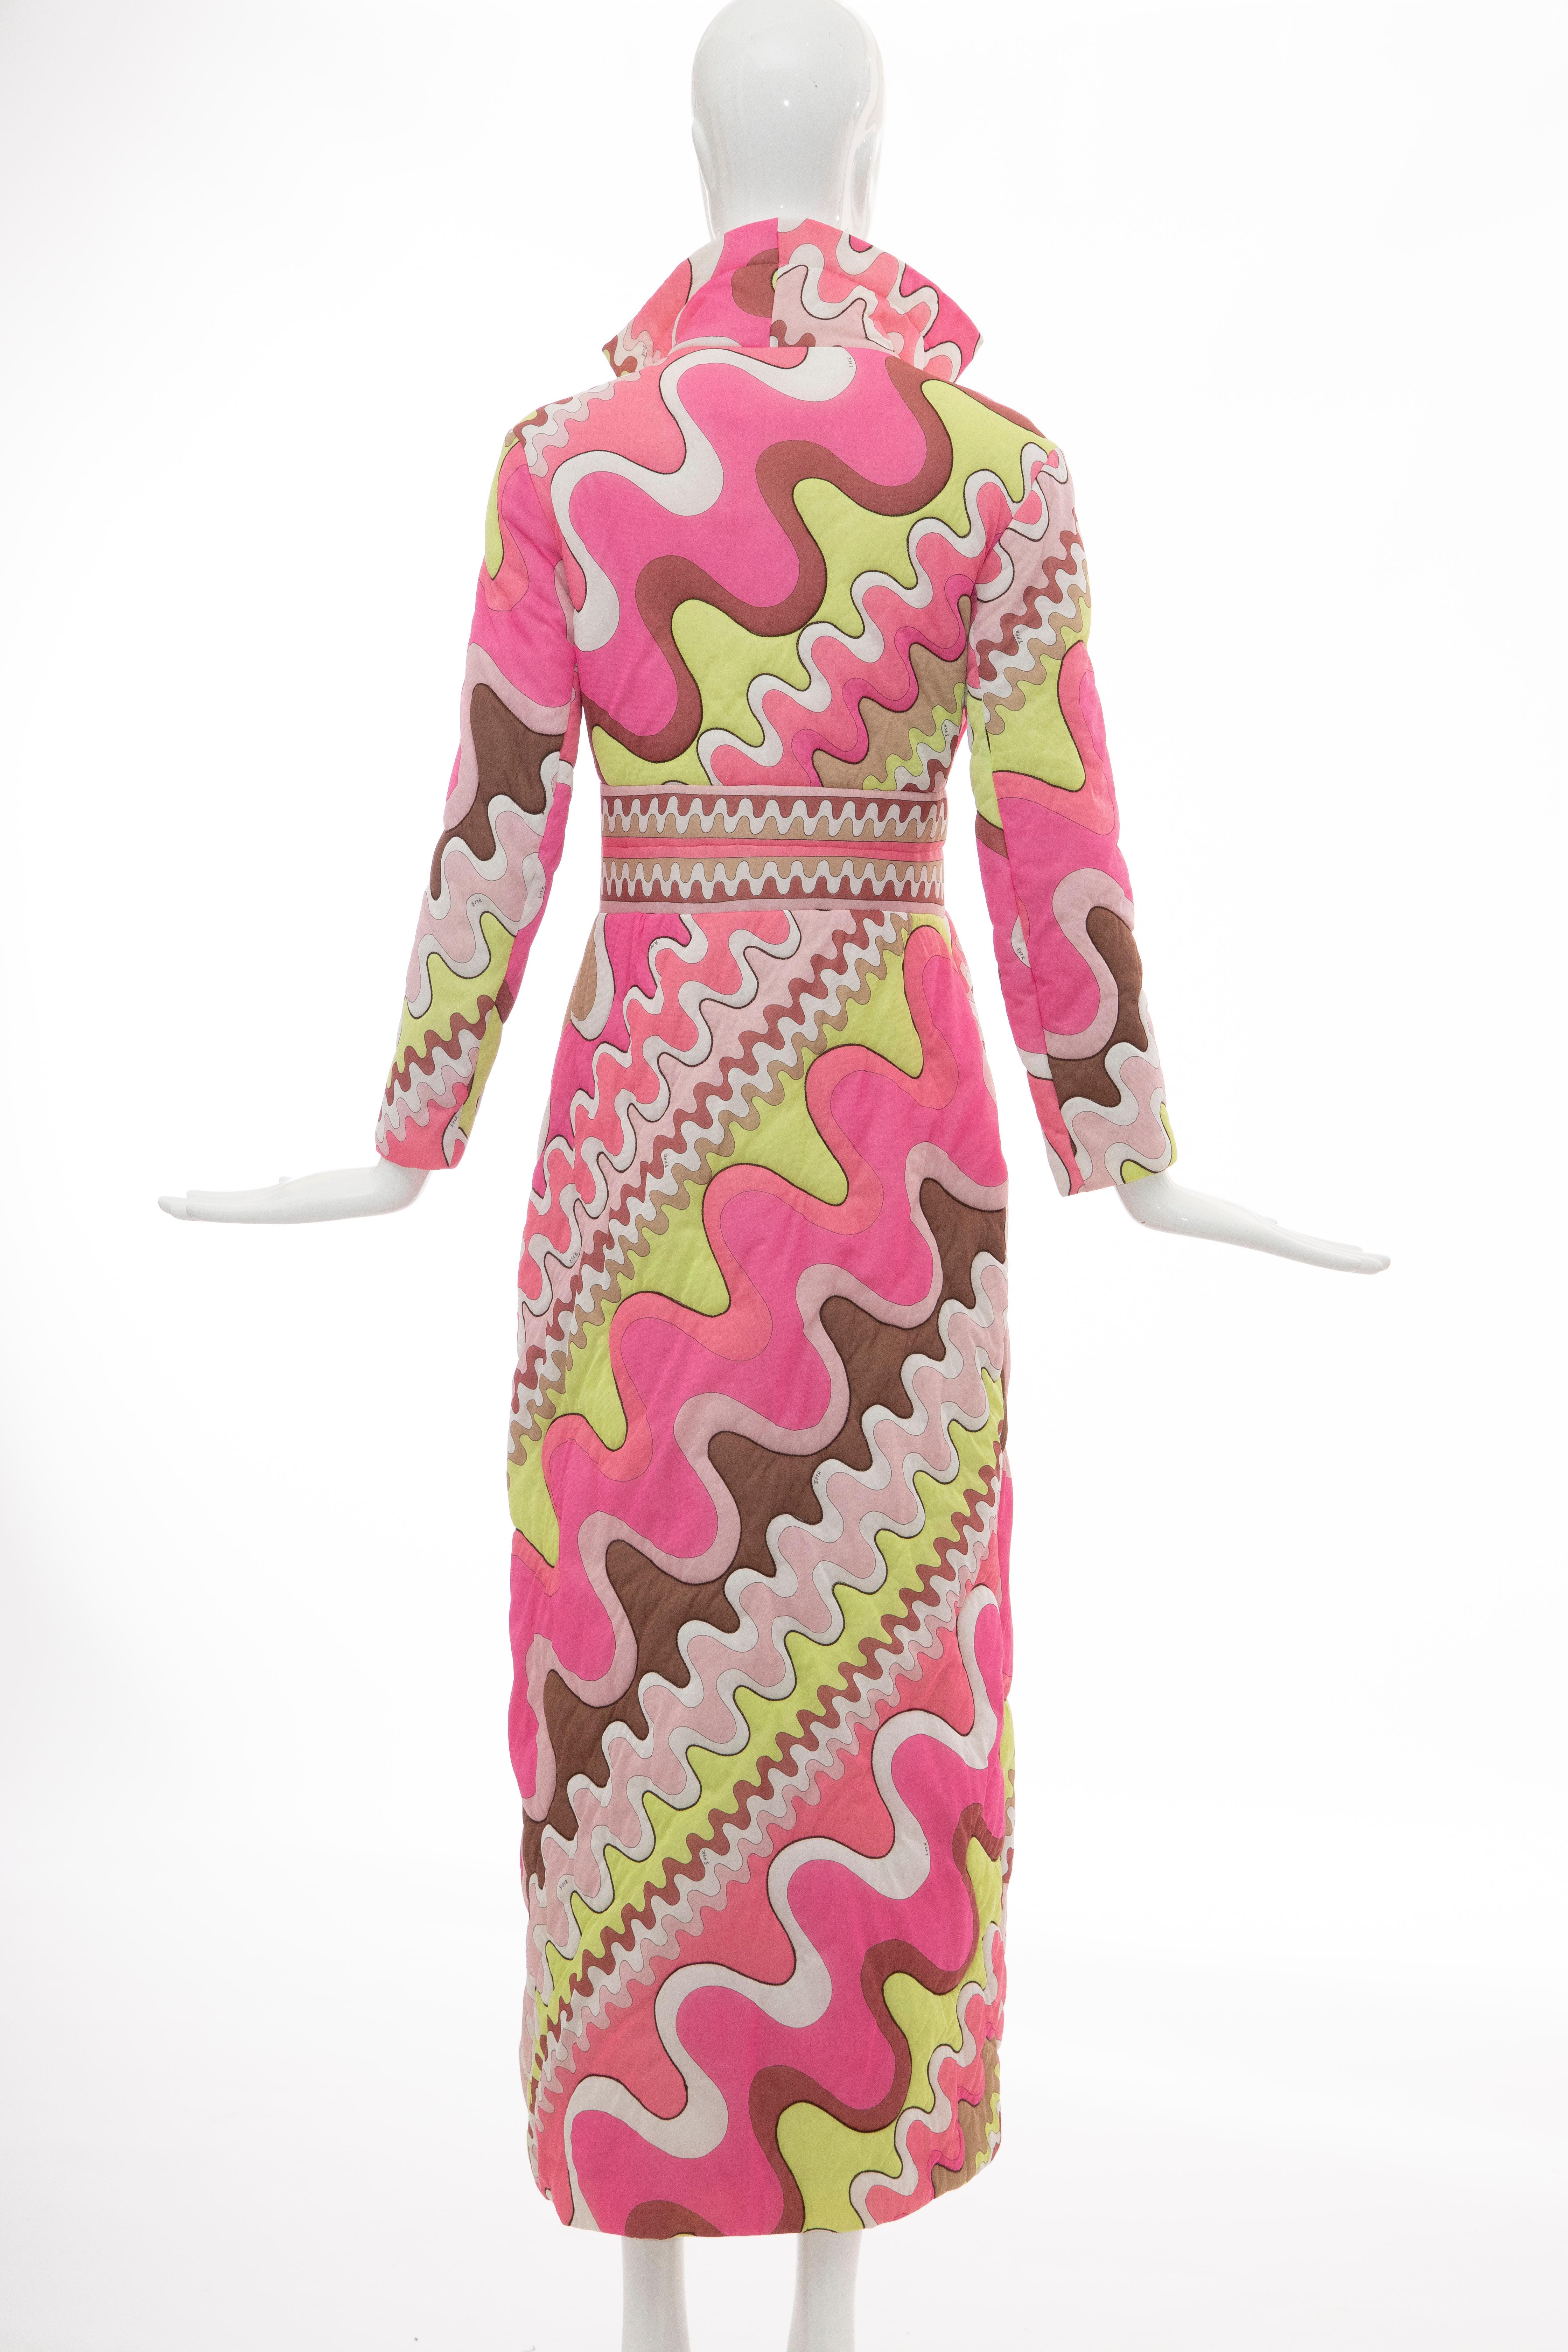 Emilio Pucci Double-Breasted Abstract Print Quilted Coat, Circa: 1970's 2